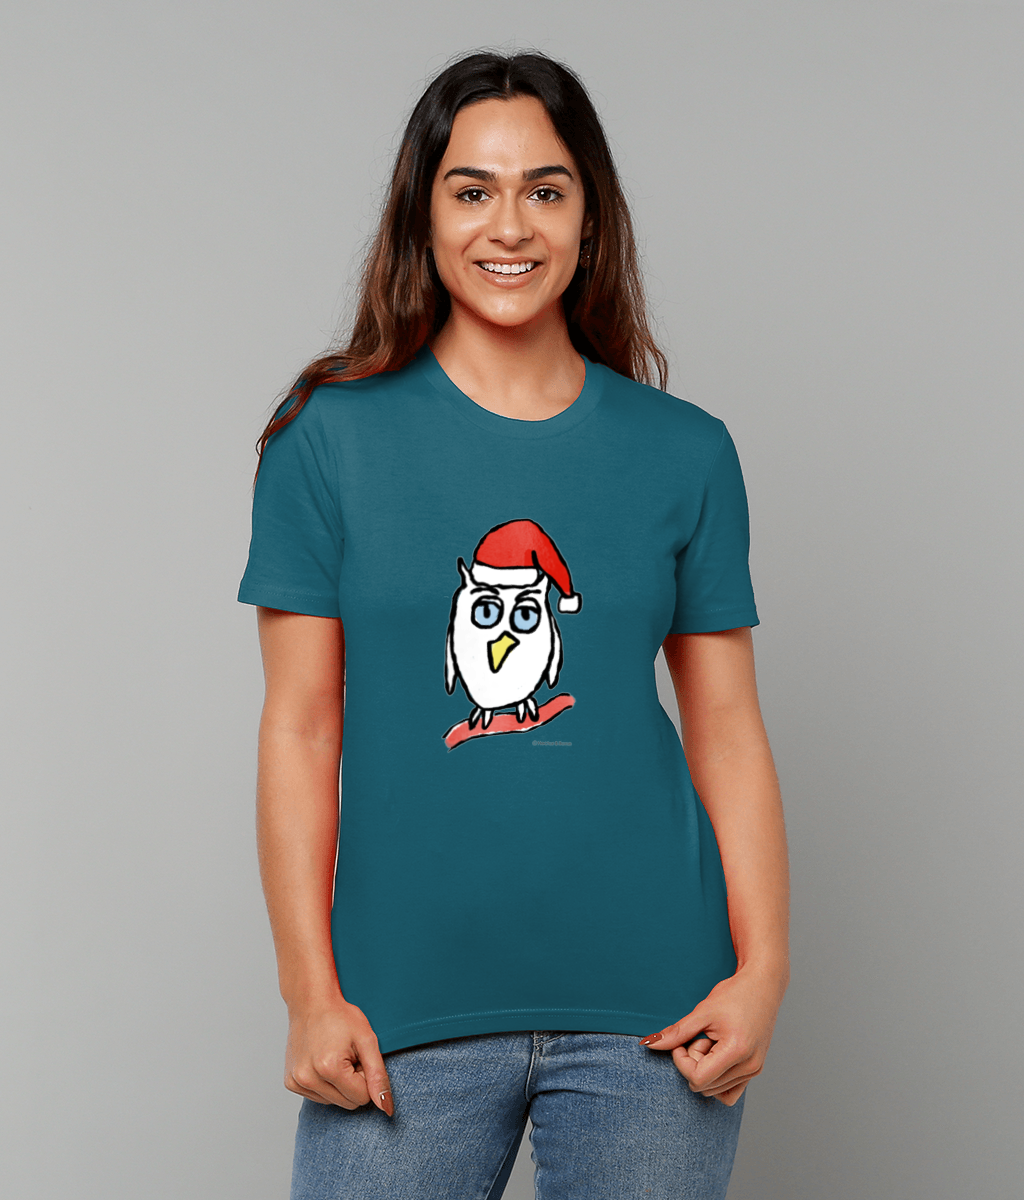 Santa Night Owl Christmas T-shirt - Happy young woman wearing an Illustrated funny Xmas night owl on a night blue colour vegan cotton t-shirt by Hector and Bone